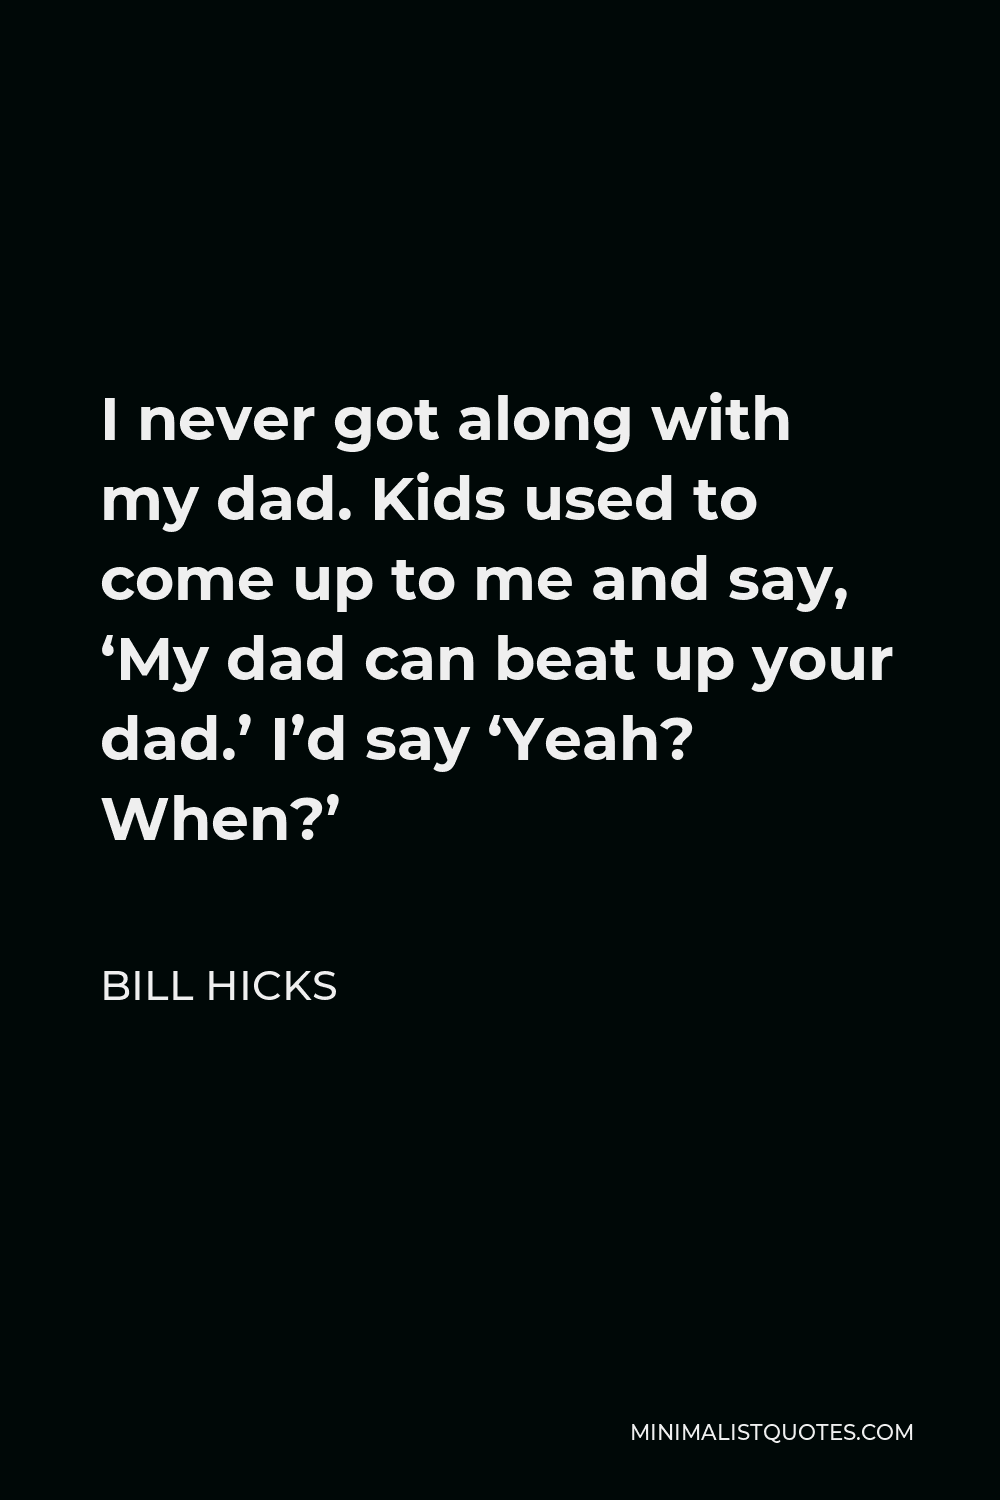 Bill Hicks Quote - I never got along with my dad. Kids used to come up to me and say, ‘My dad can beat up your dad.’ I’d say ‘Yeah? When?’